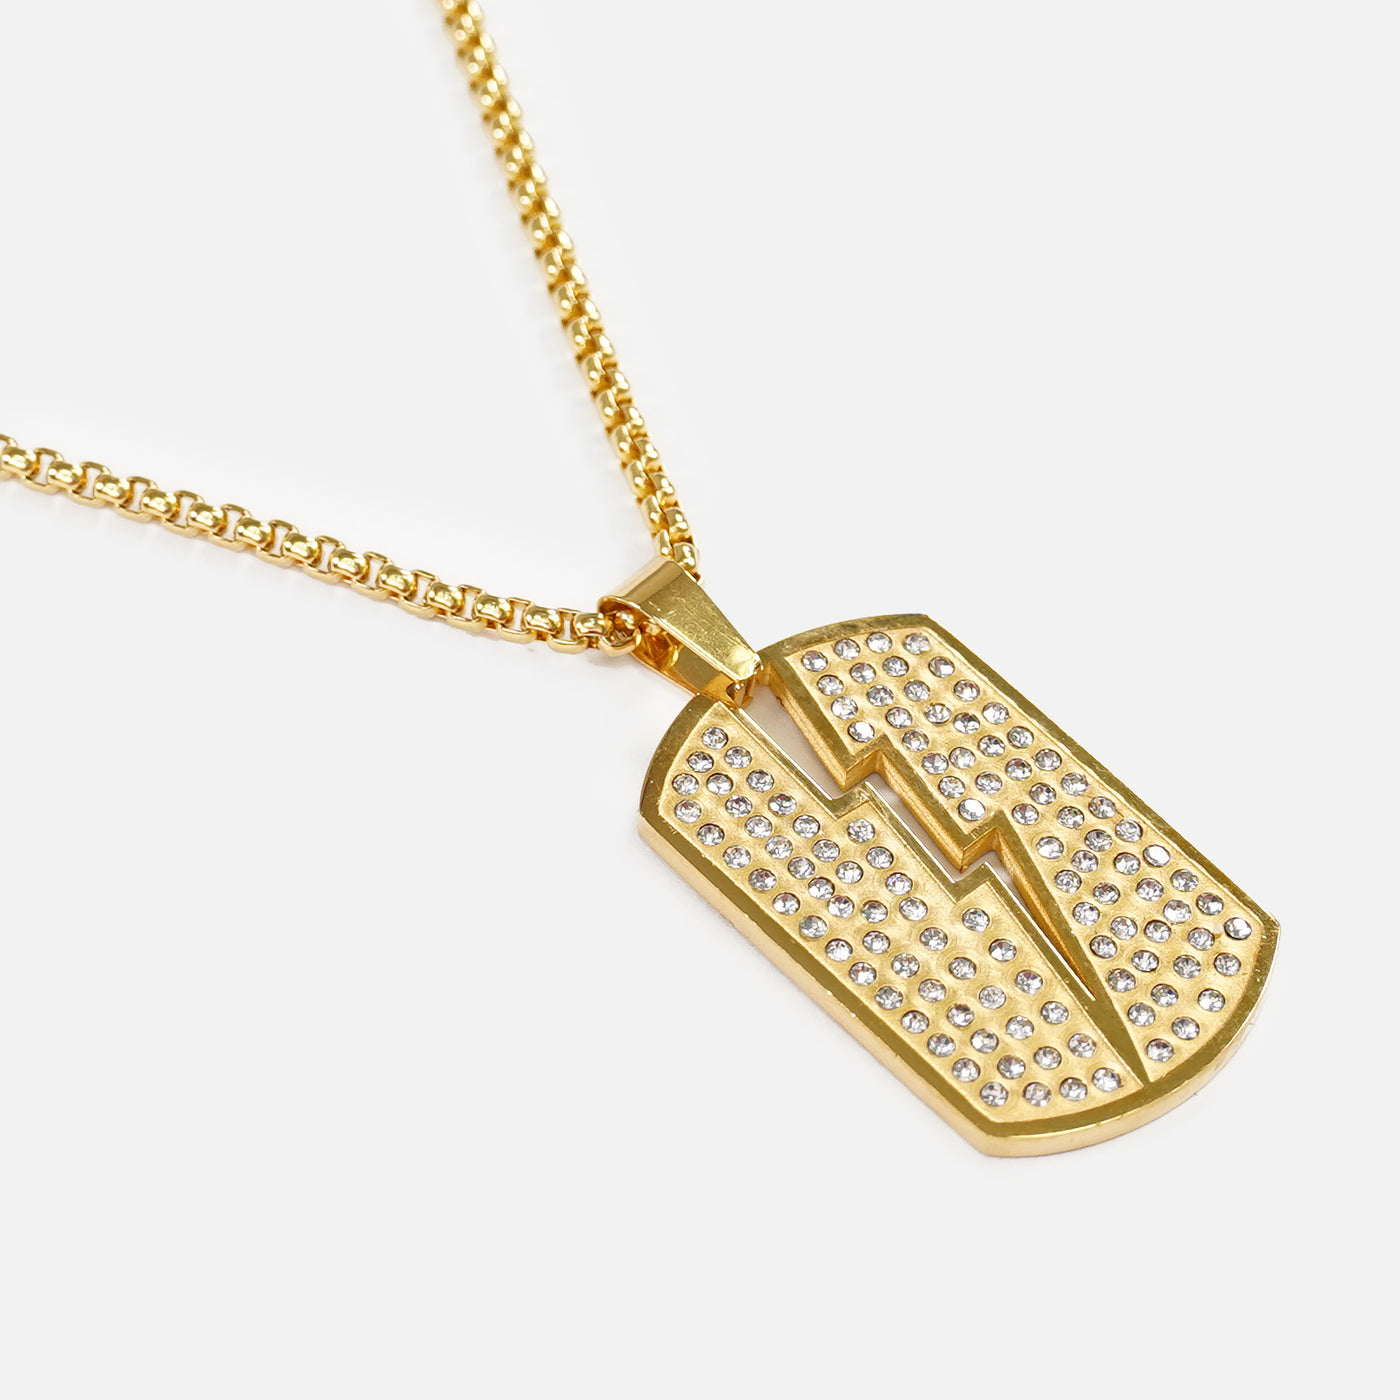 Trueno 1¾" Pendant with Chain Necklace - Gold Plated Stainless Steel